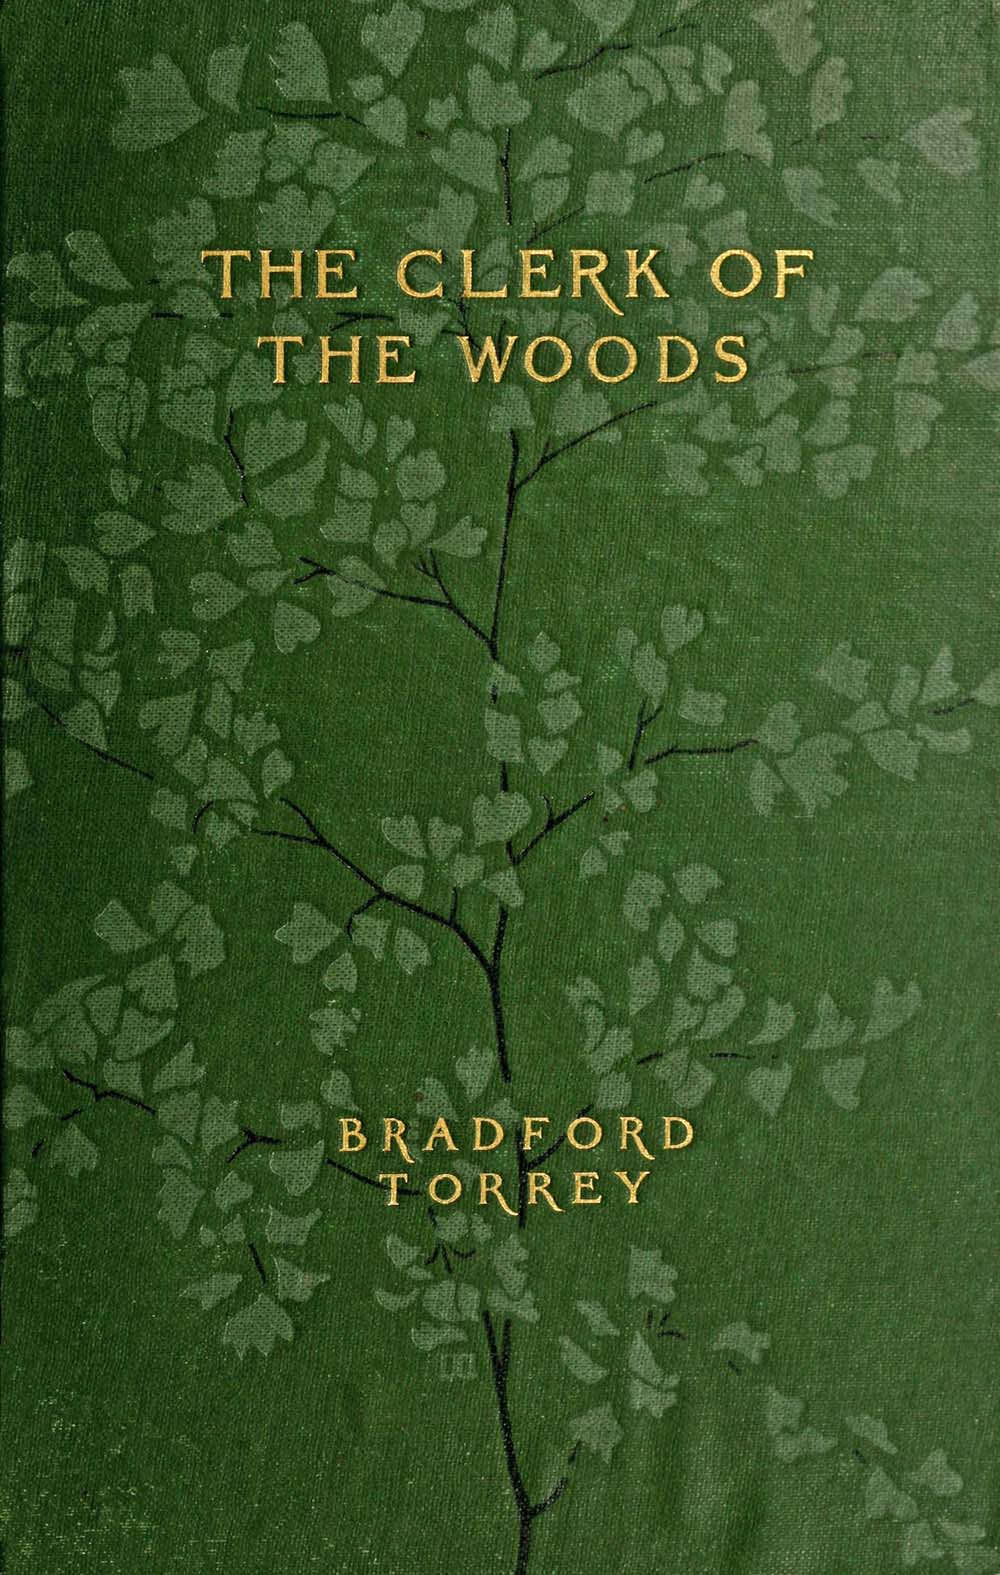 The Project Gutenberg eBook of The Clerk of the Woods, by Bradford Torrey picture